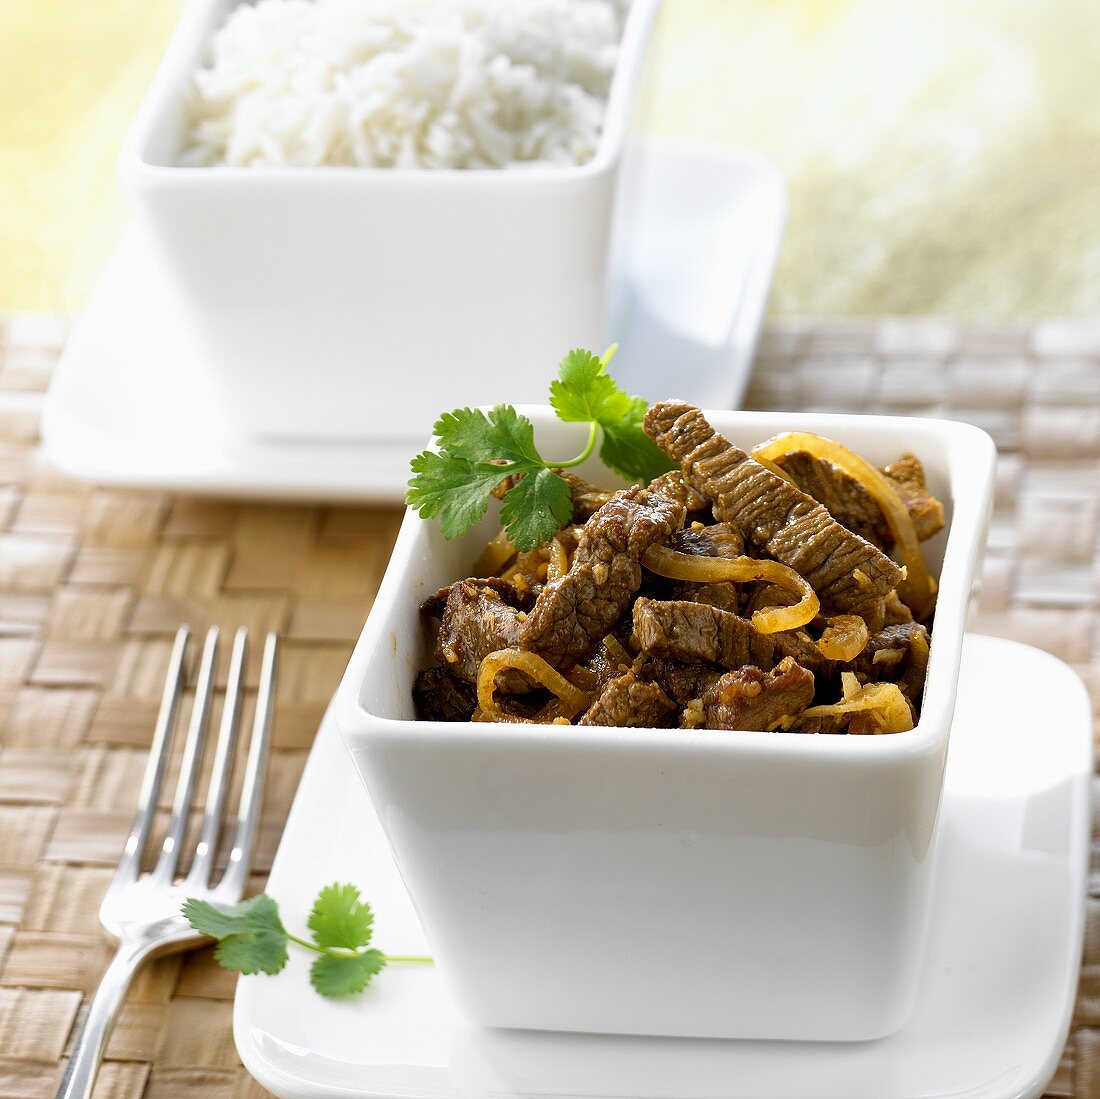 Beef curry with small bowl of basmati rice (Indonesia)